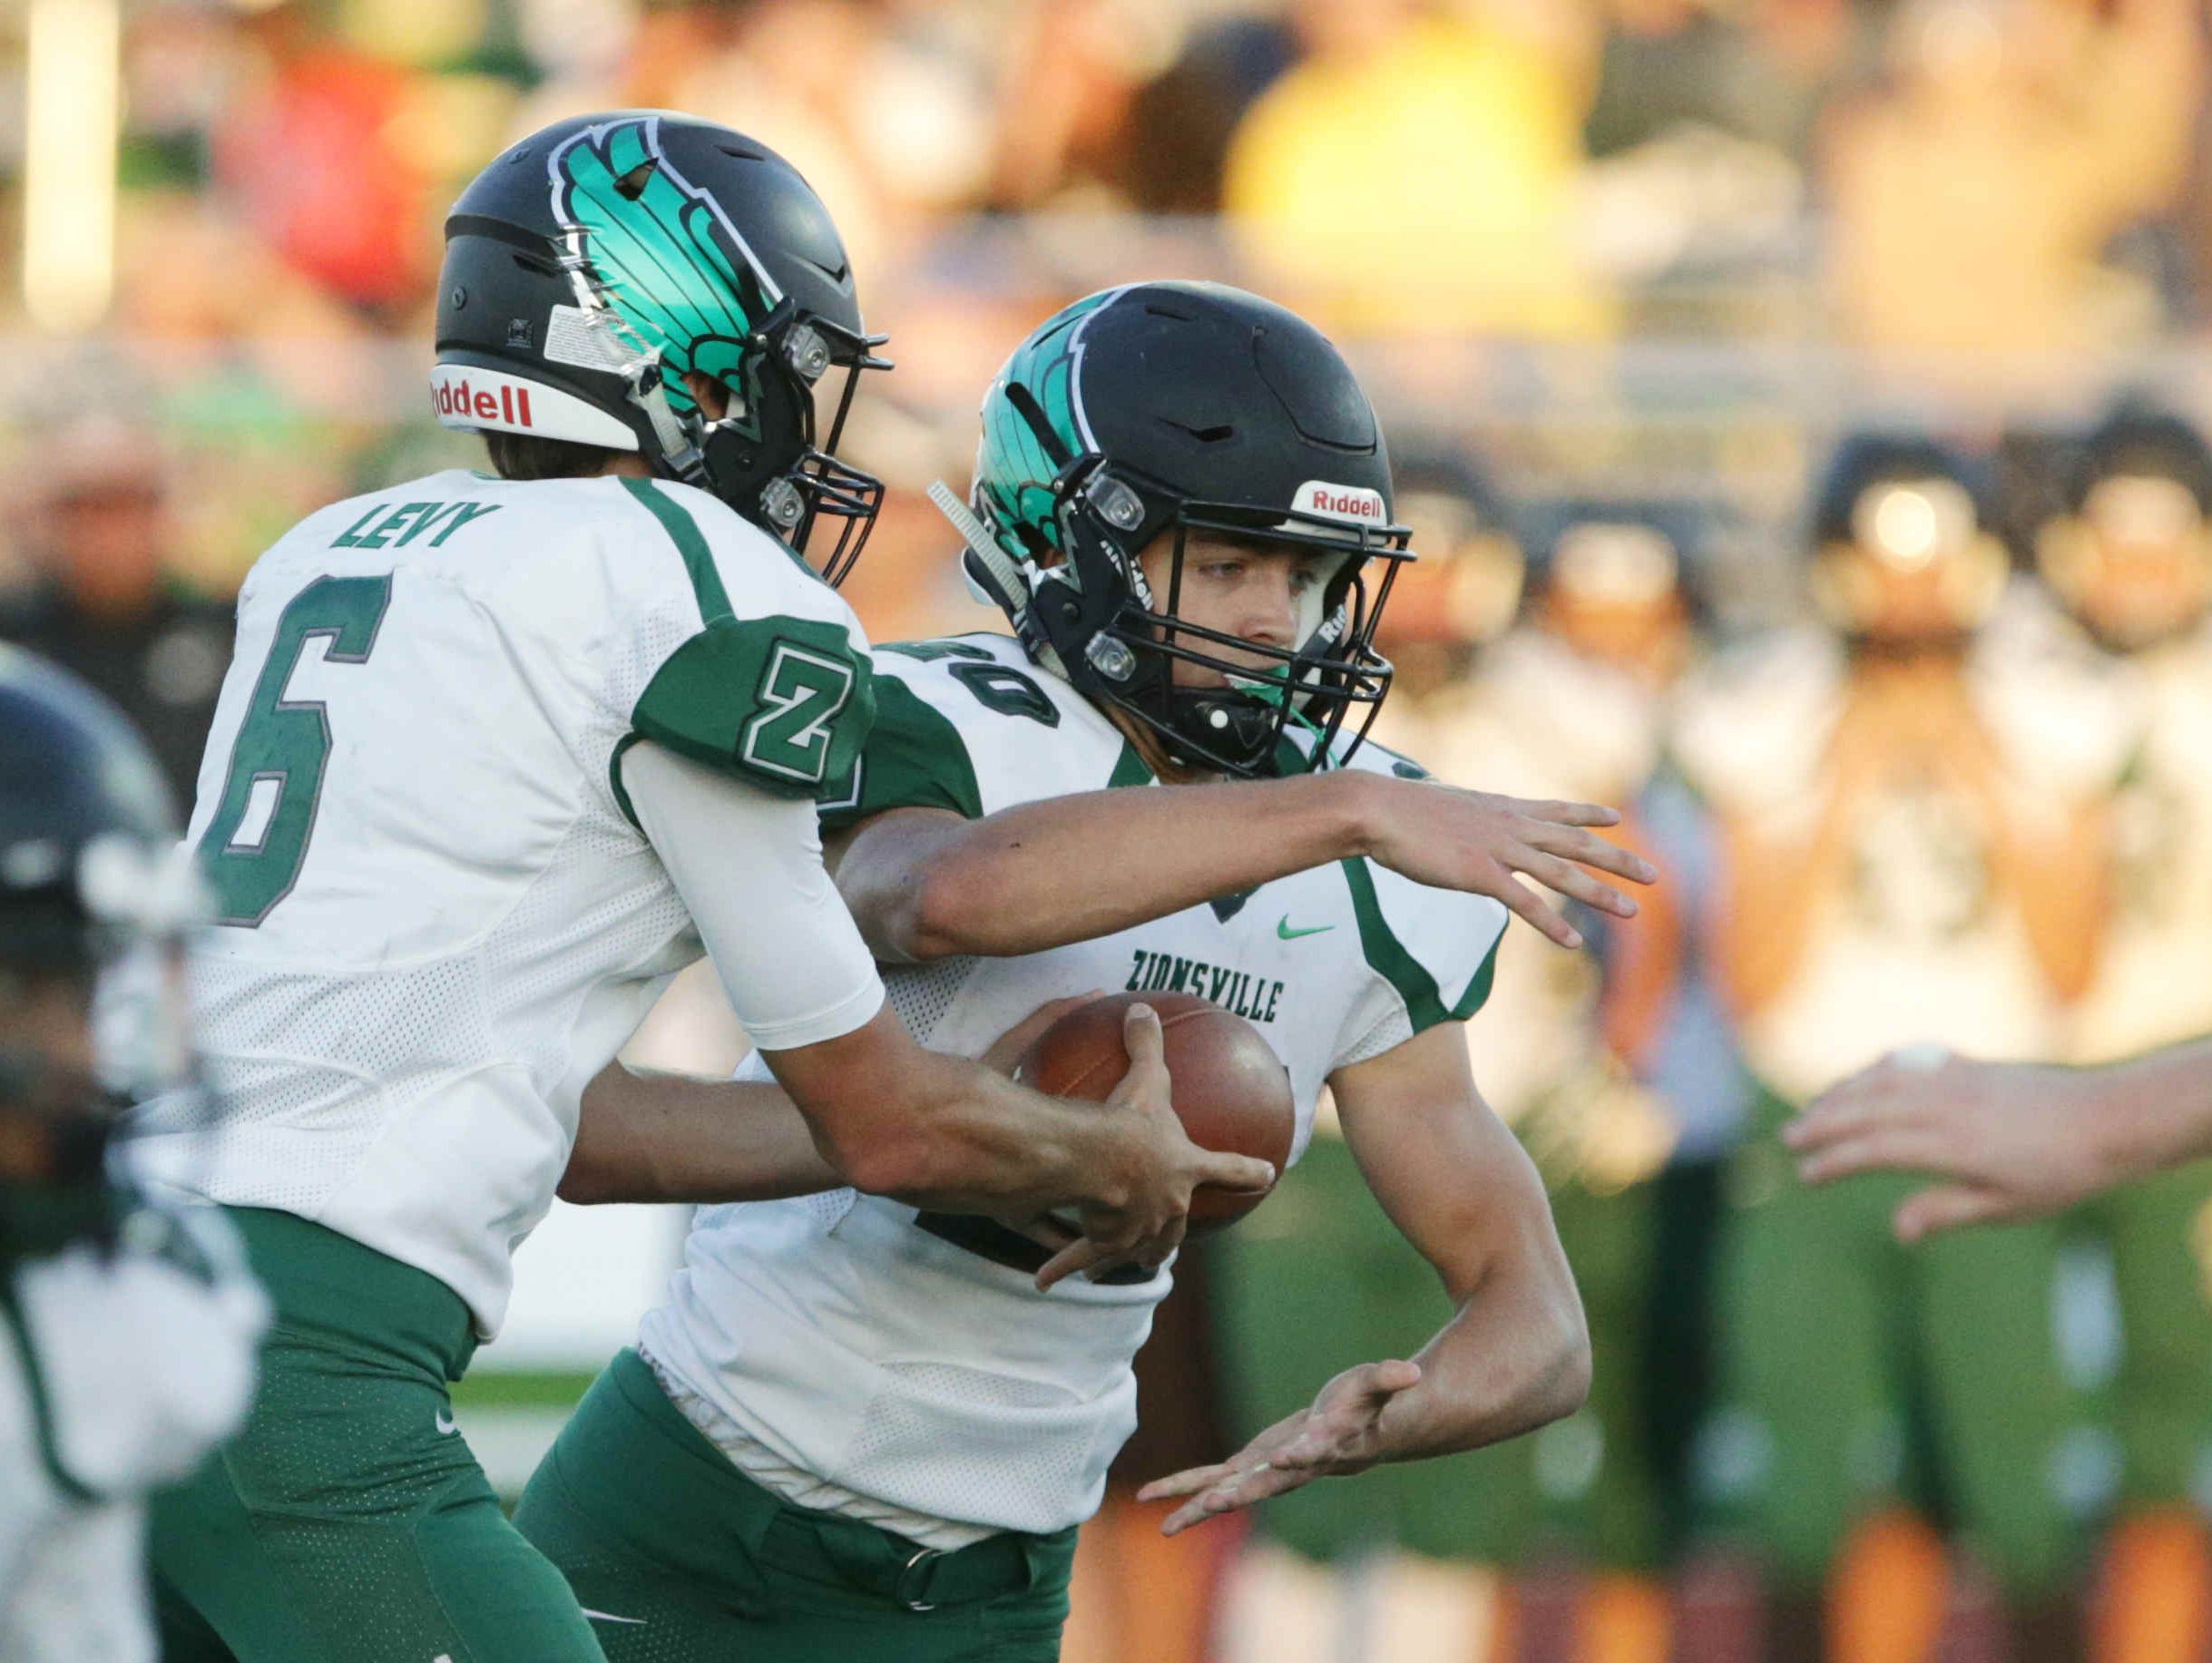 Zionsville's QB, No. 6, Blake Levy fakes a hand off to No. 20, Brenden Mikesell, Friday September 2nd, 2016. Westfiled faced off against Zionsville at Westfields's Riverview Health Stadium.